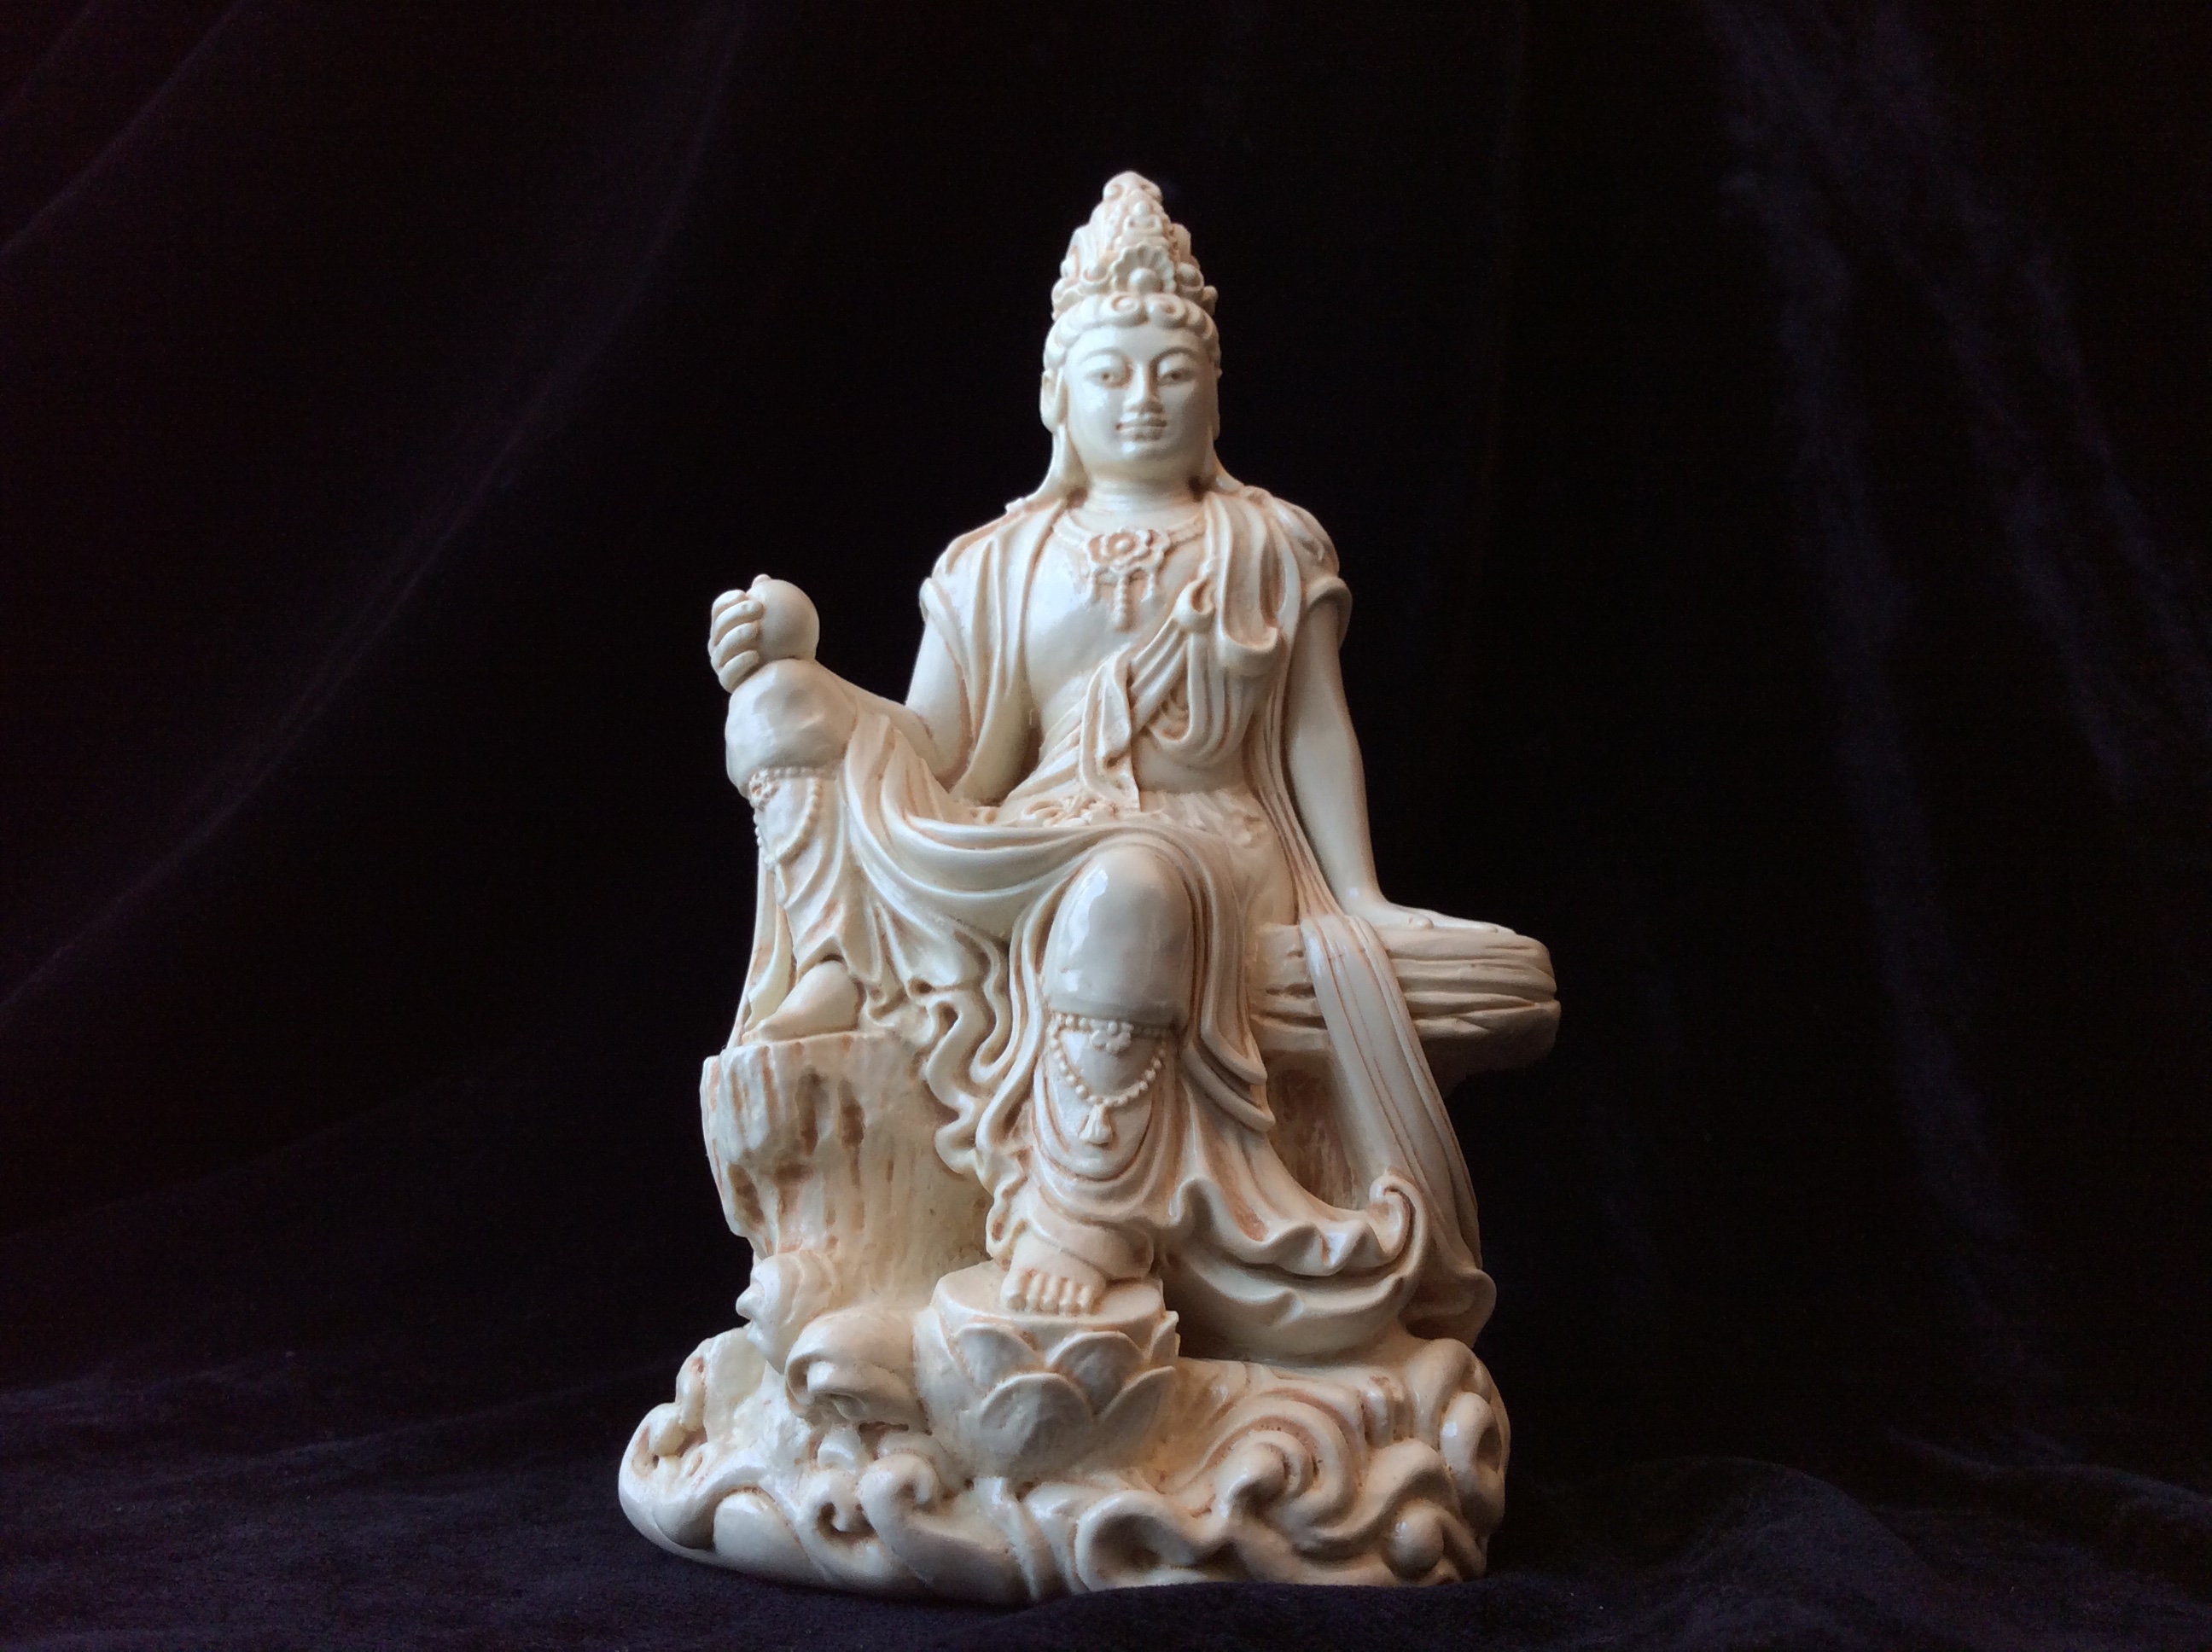 by Private Label Royal Ease Kuan-yin Water Moon Guanyin Statue Bronze Ships Immediatly Sale 